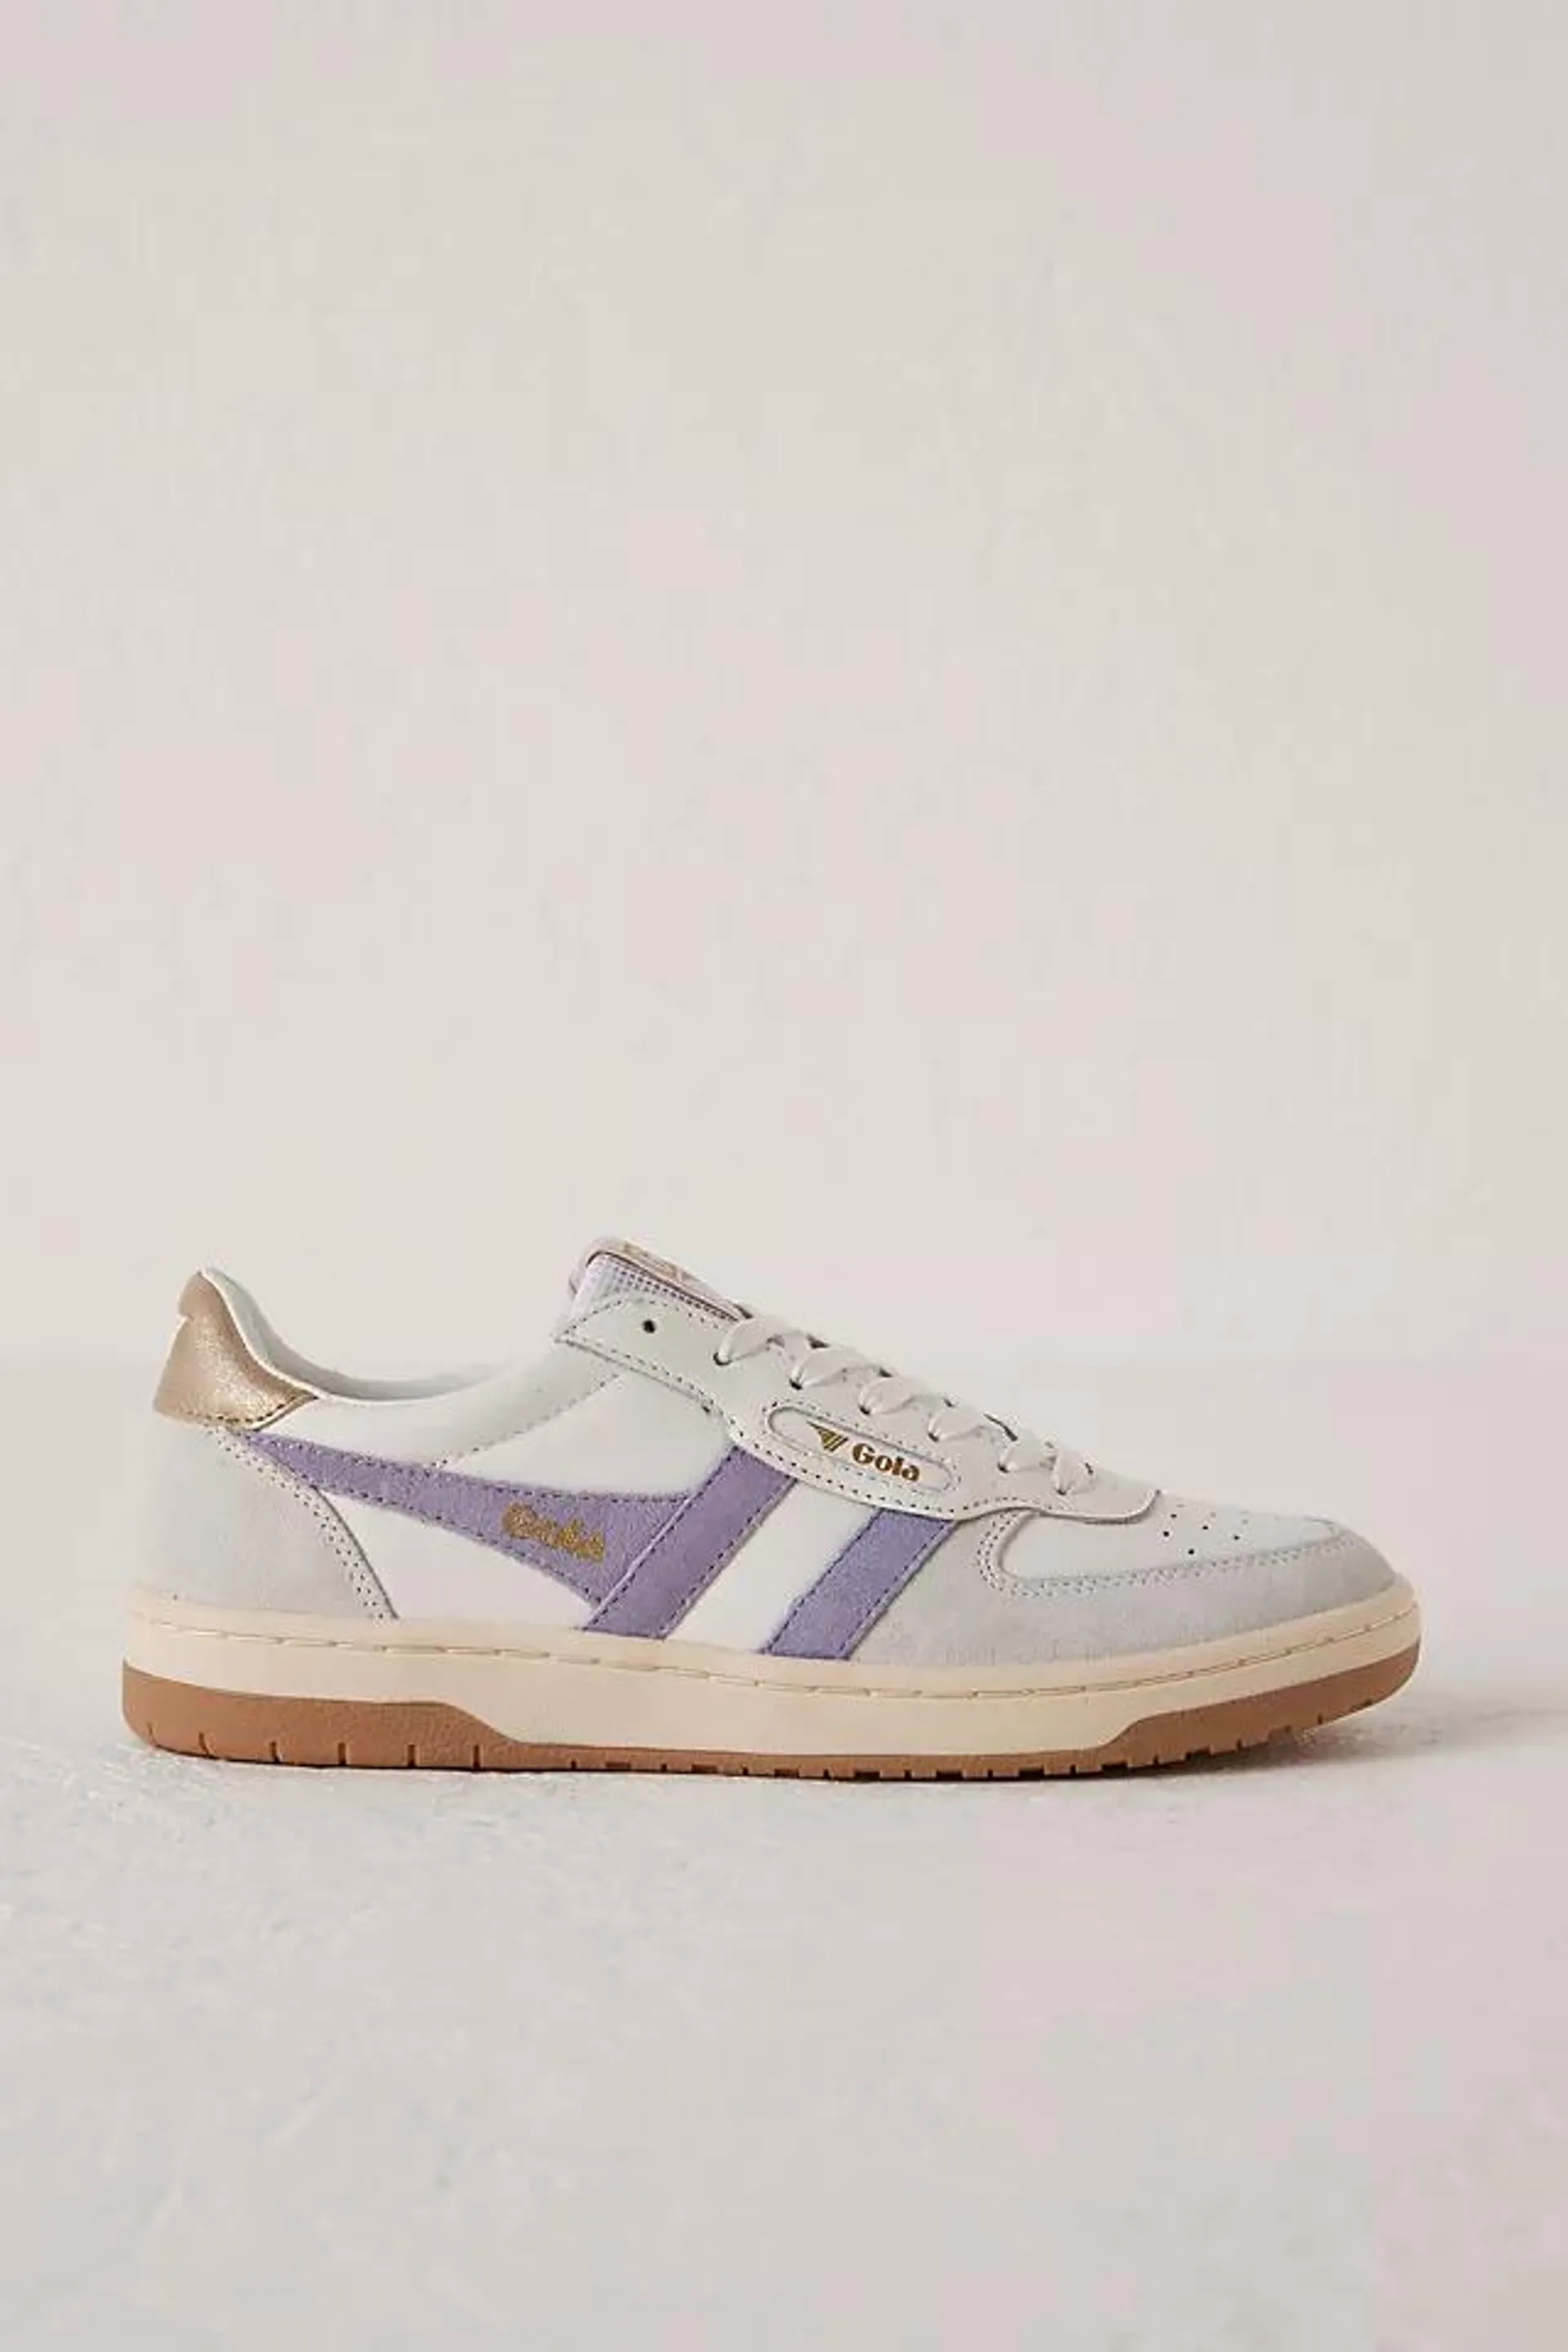 Gola Hawk Suede Trainers